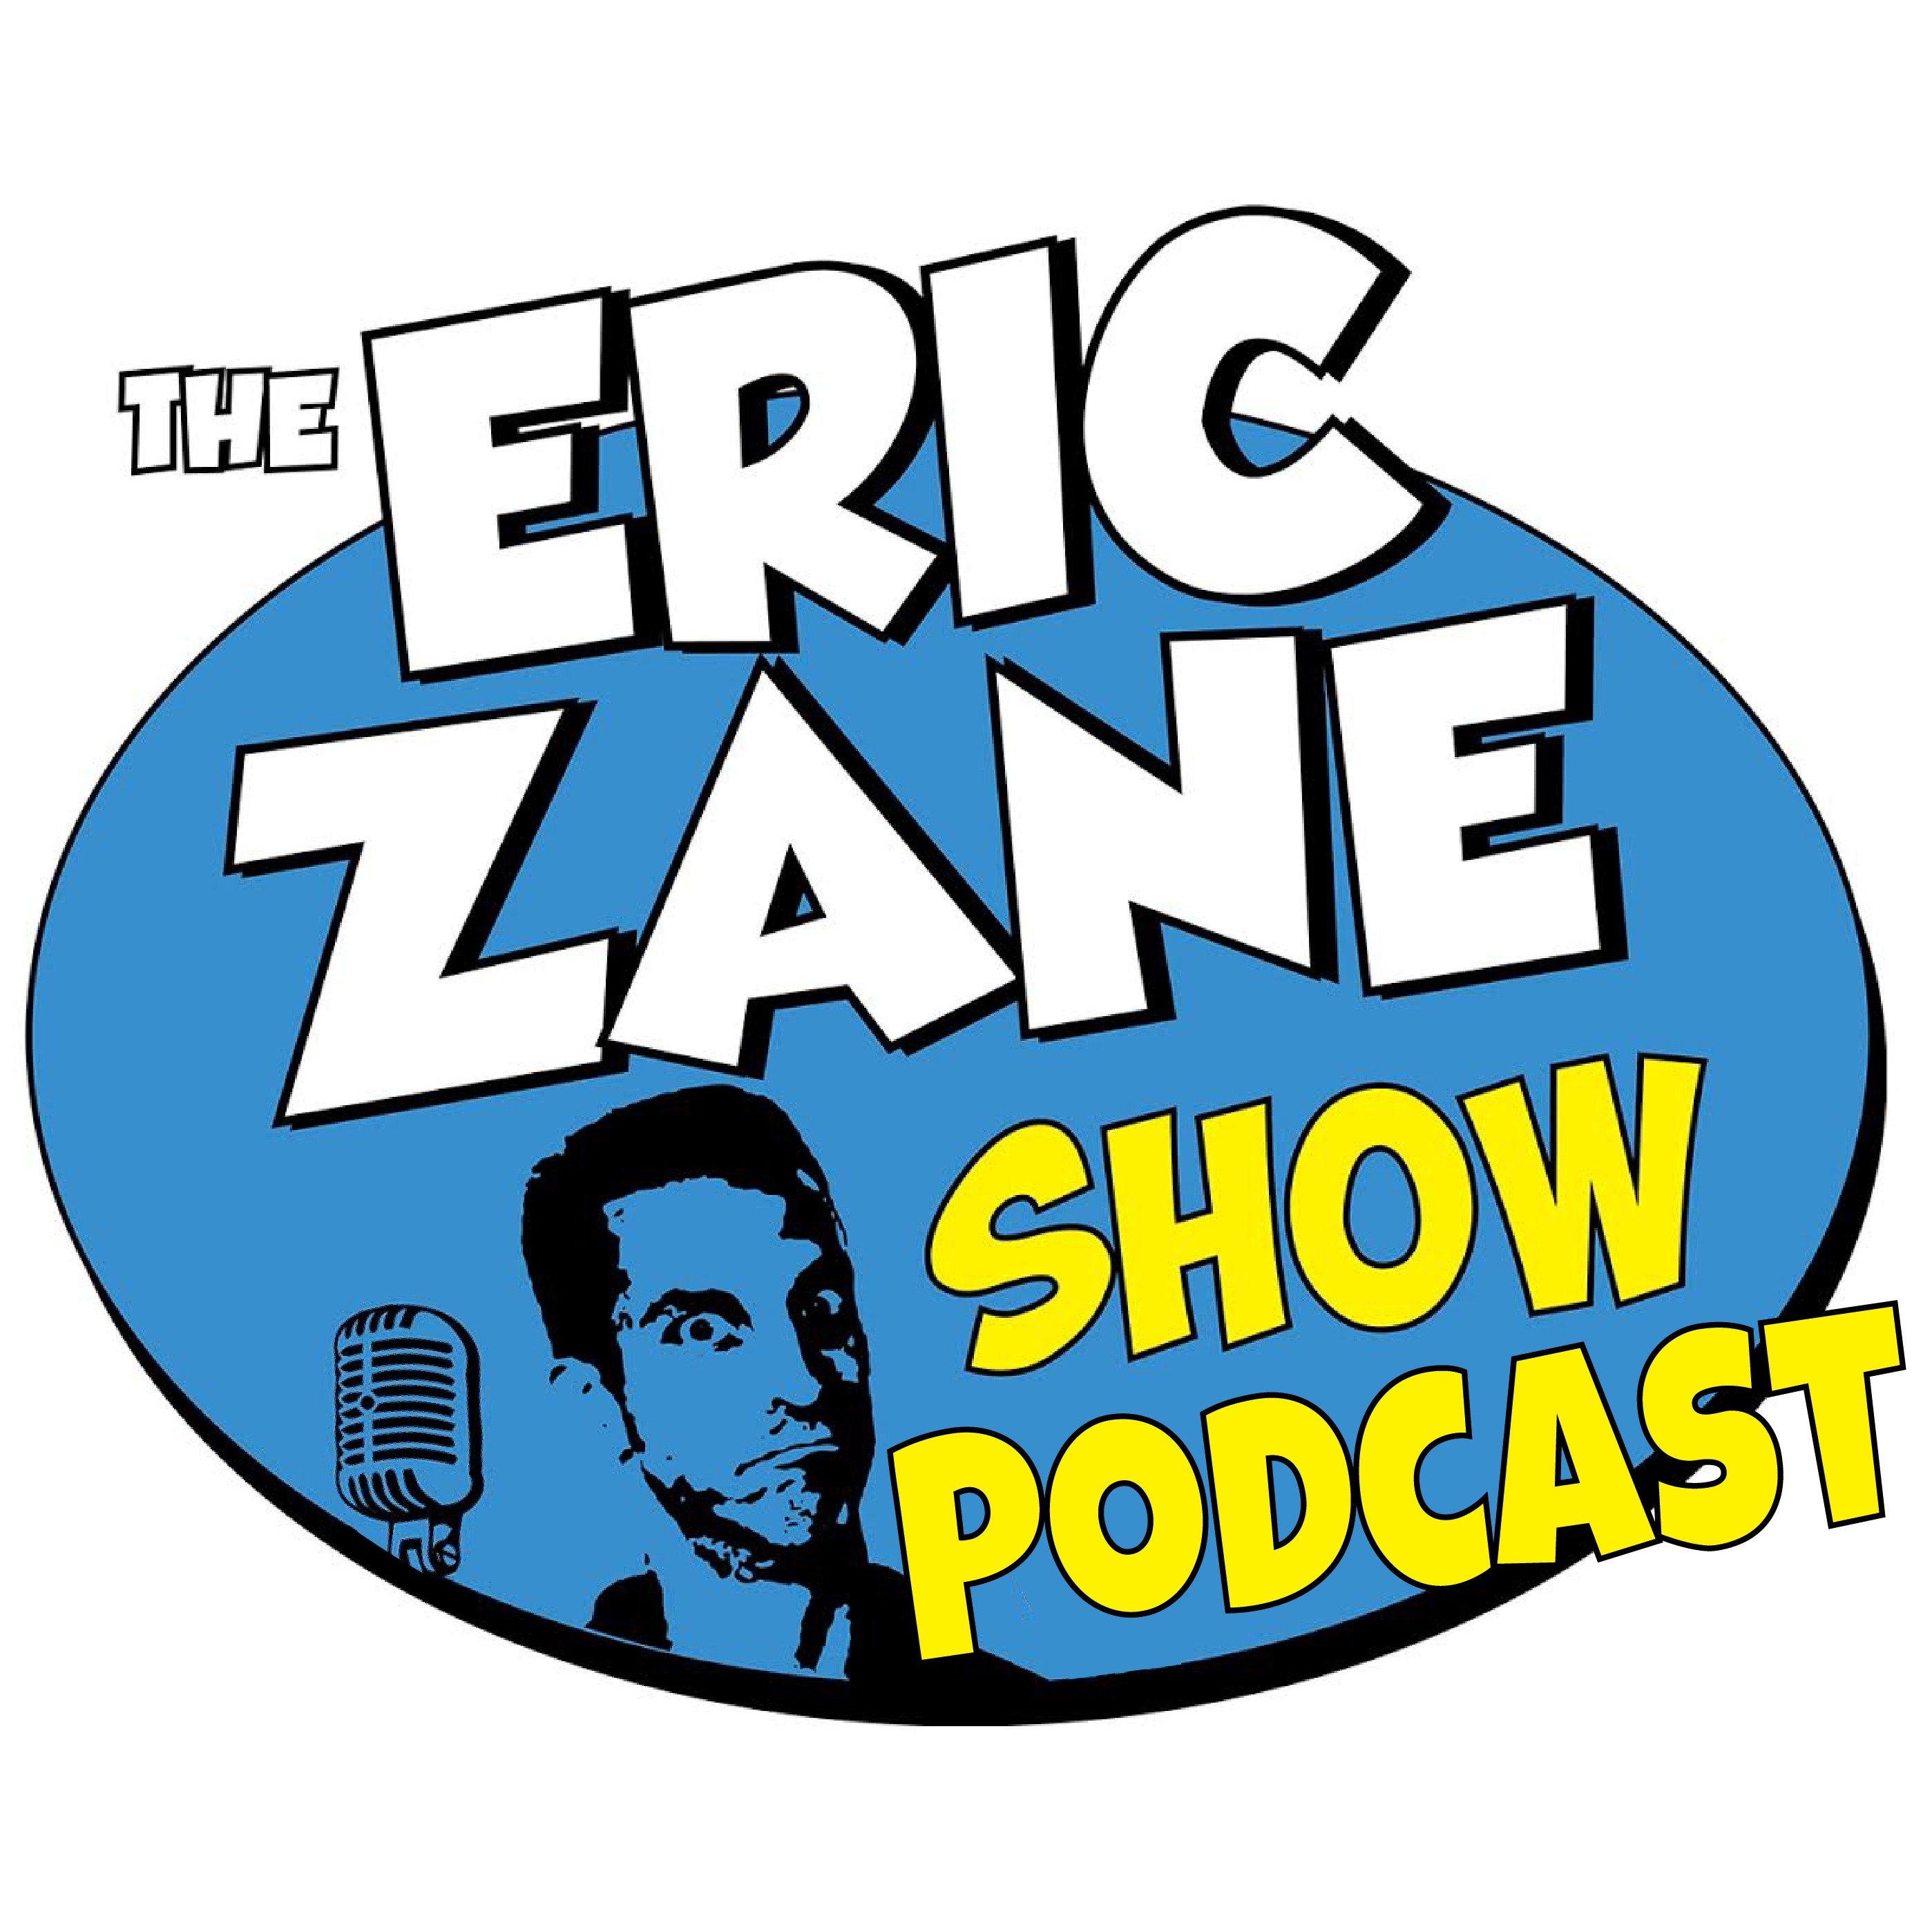 Eric Zane Show Podcast 907 More crying from the Garden of Listeners.